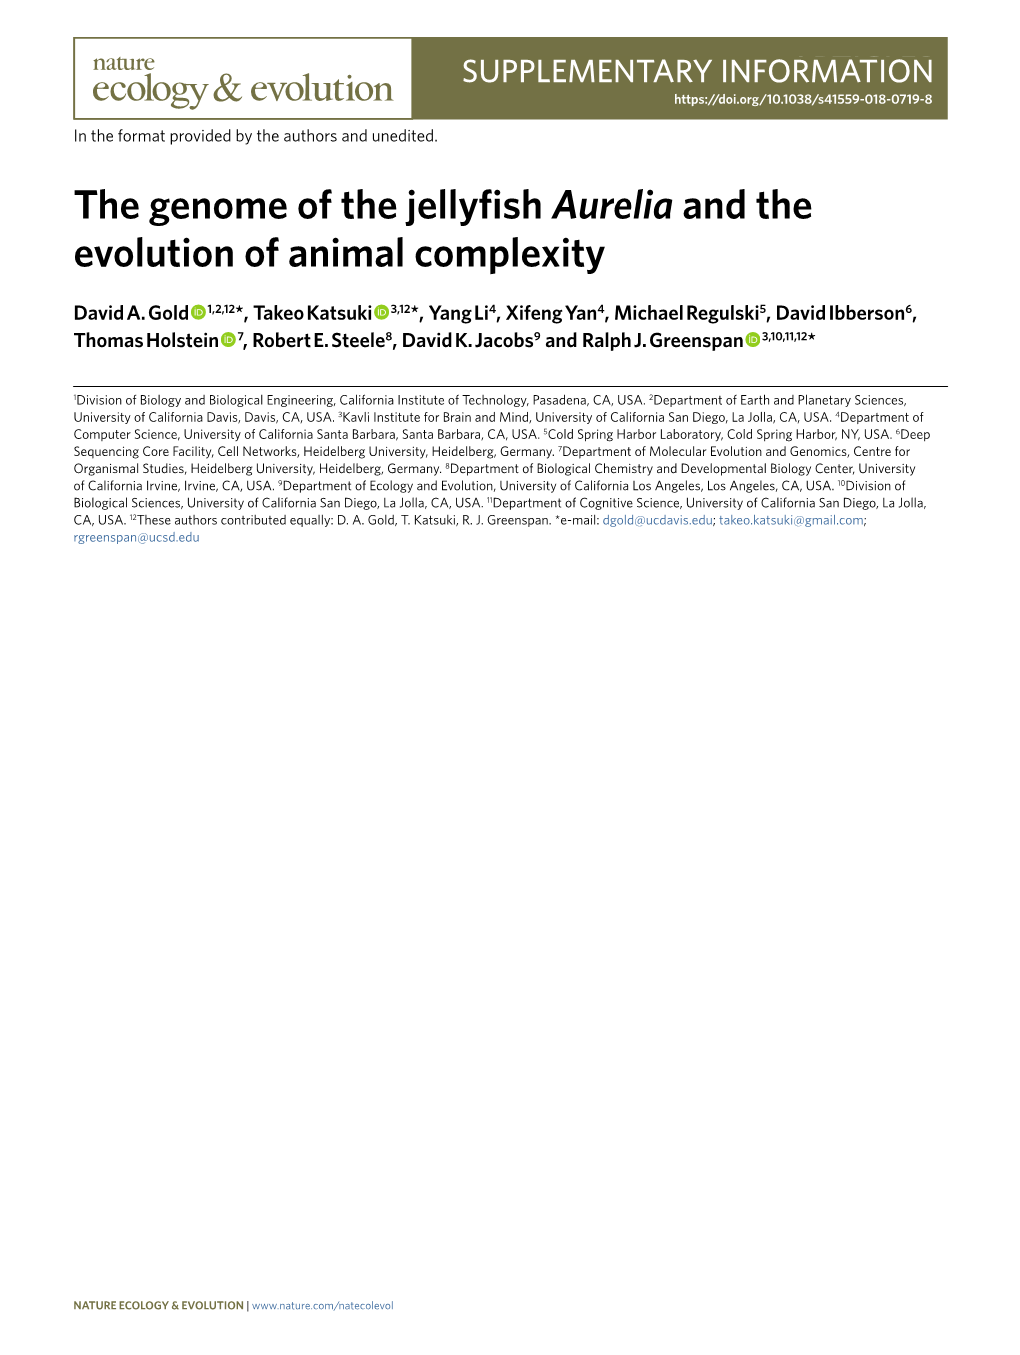 The Genome of the Jellyfish Aurelia and the Evolution of Animal Complexity